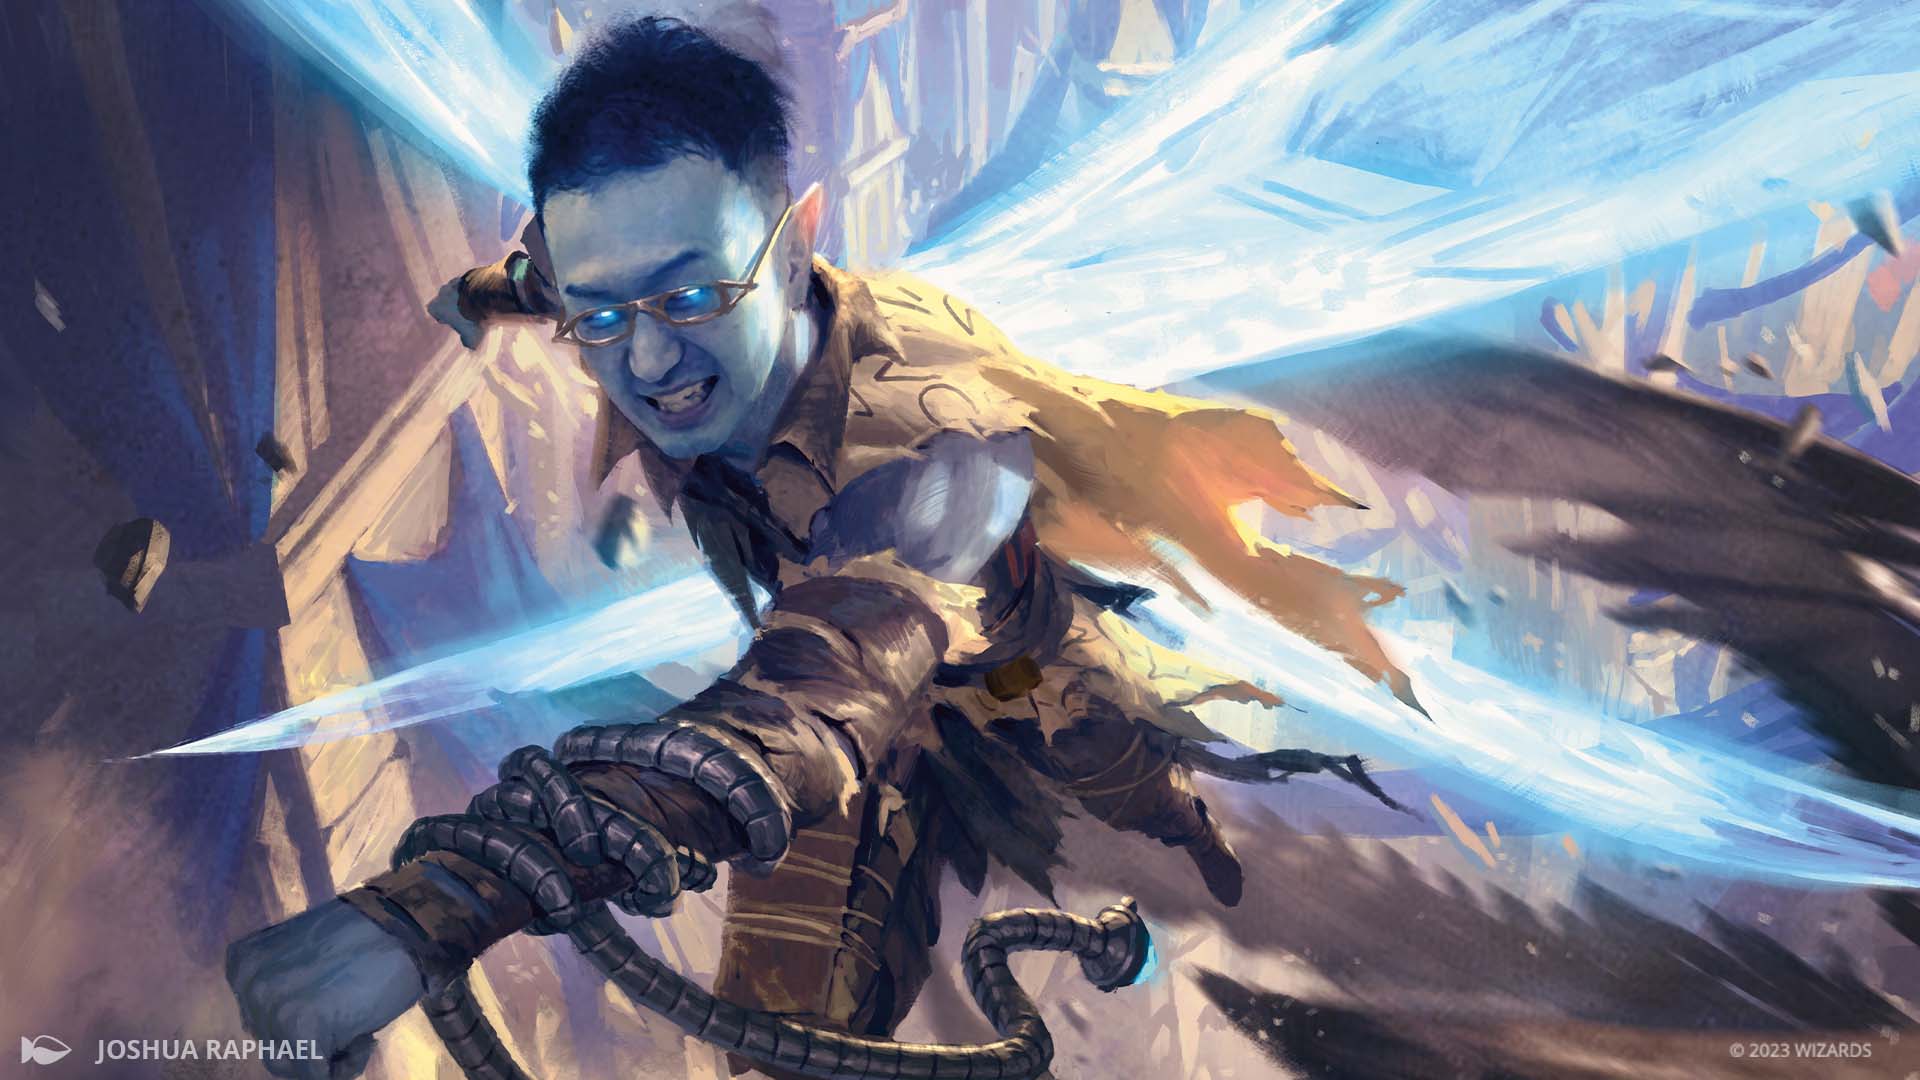 10 Fun Facts About The Magic: The Gathering World Championships